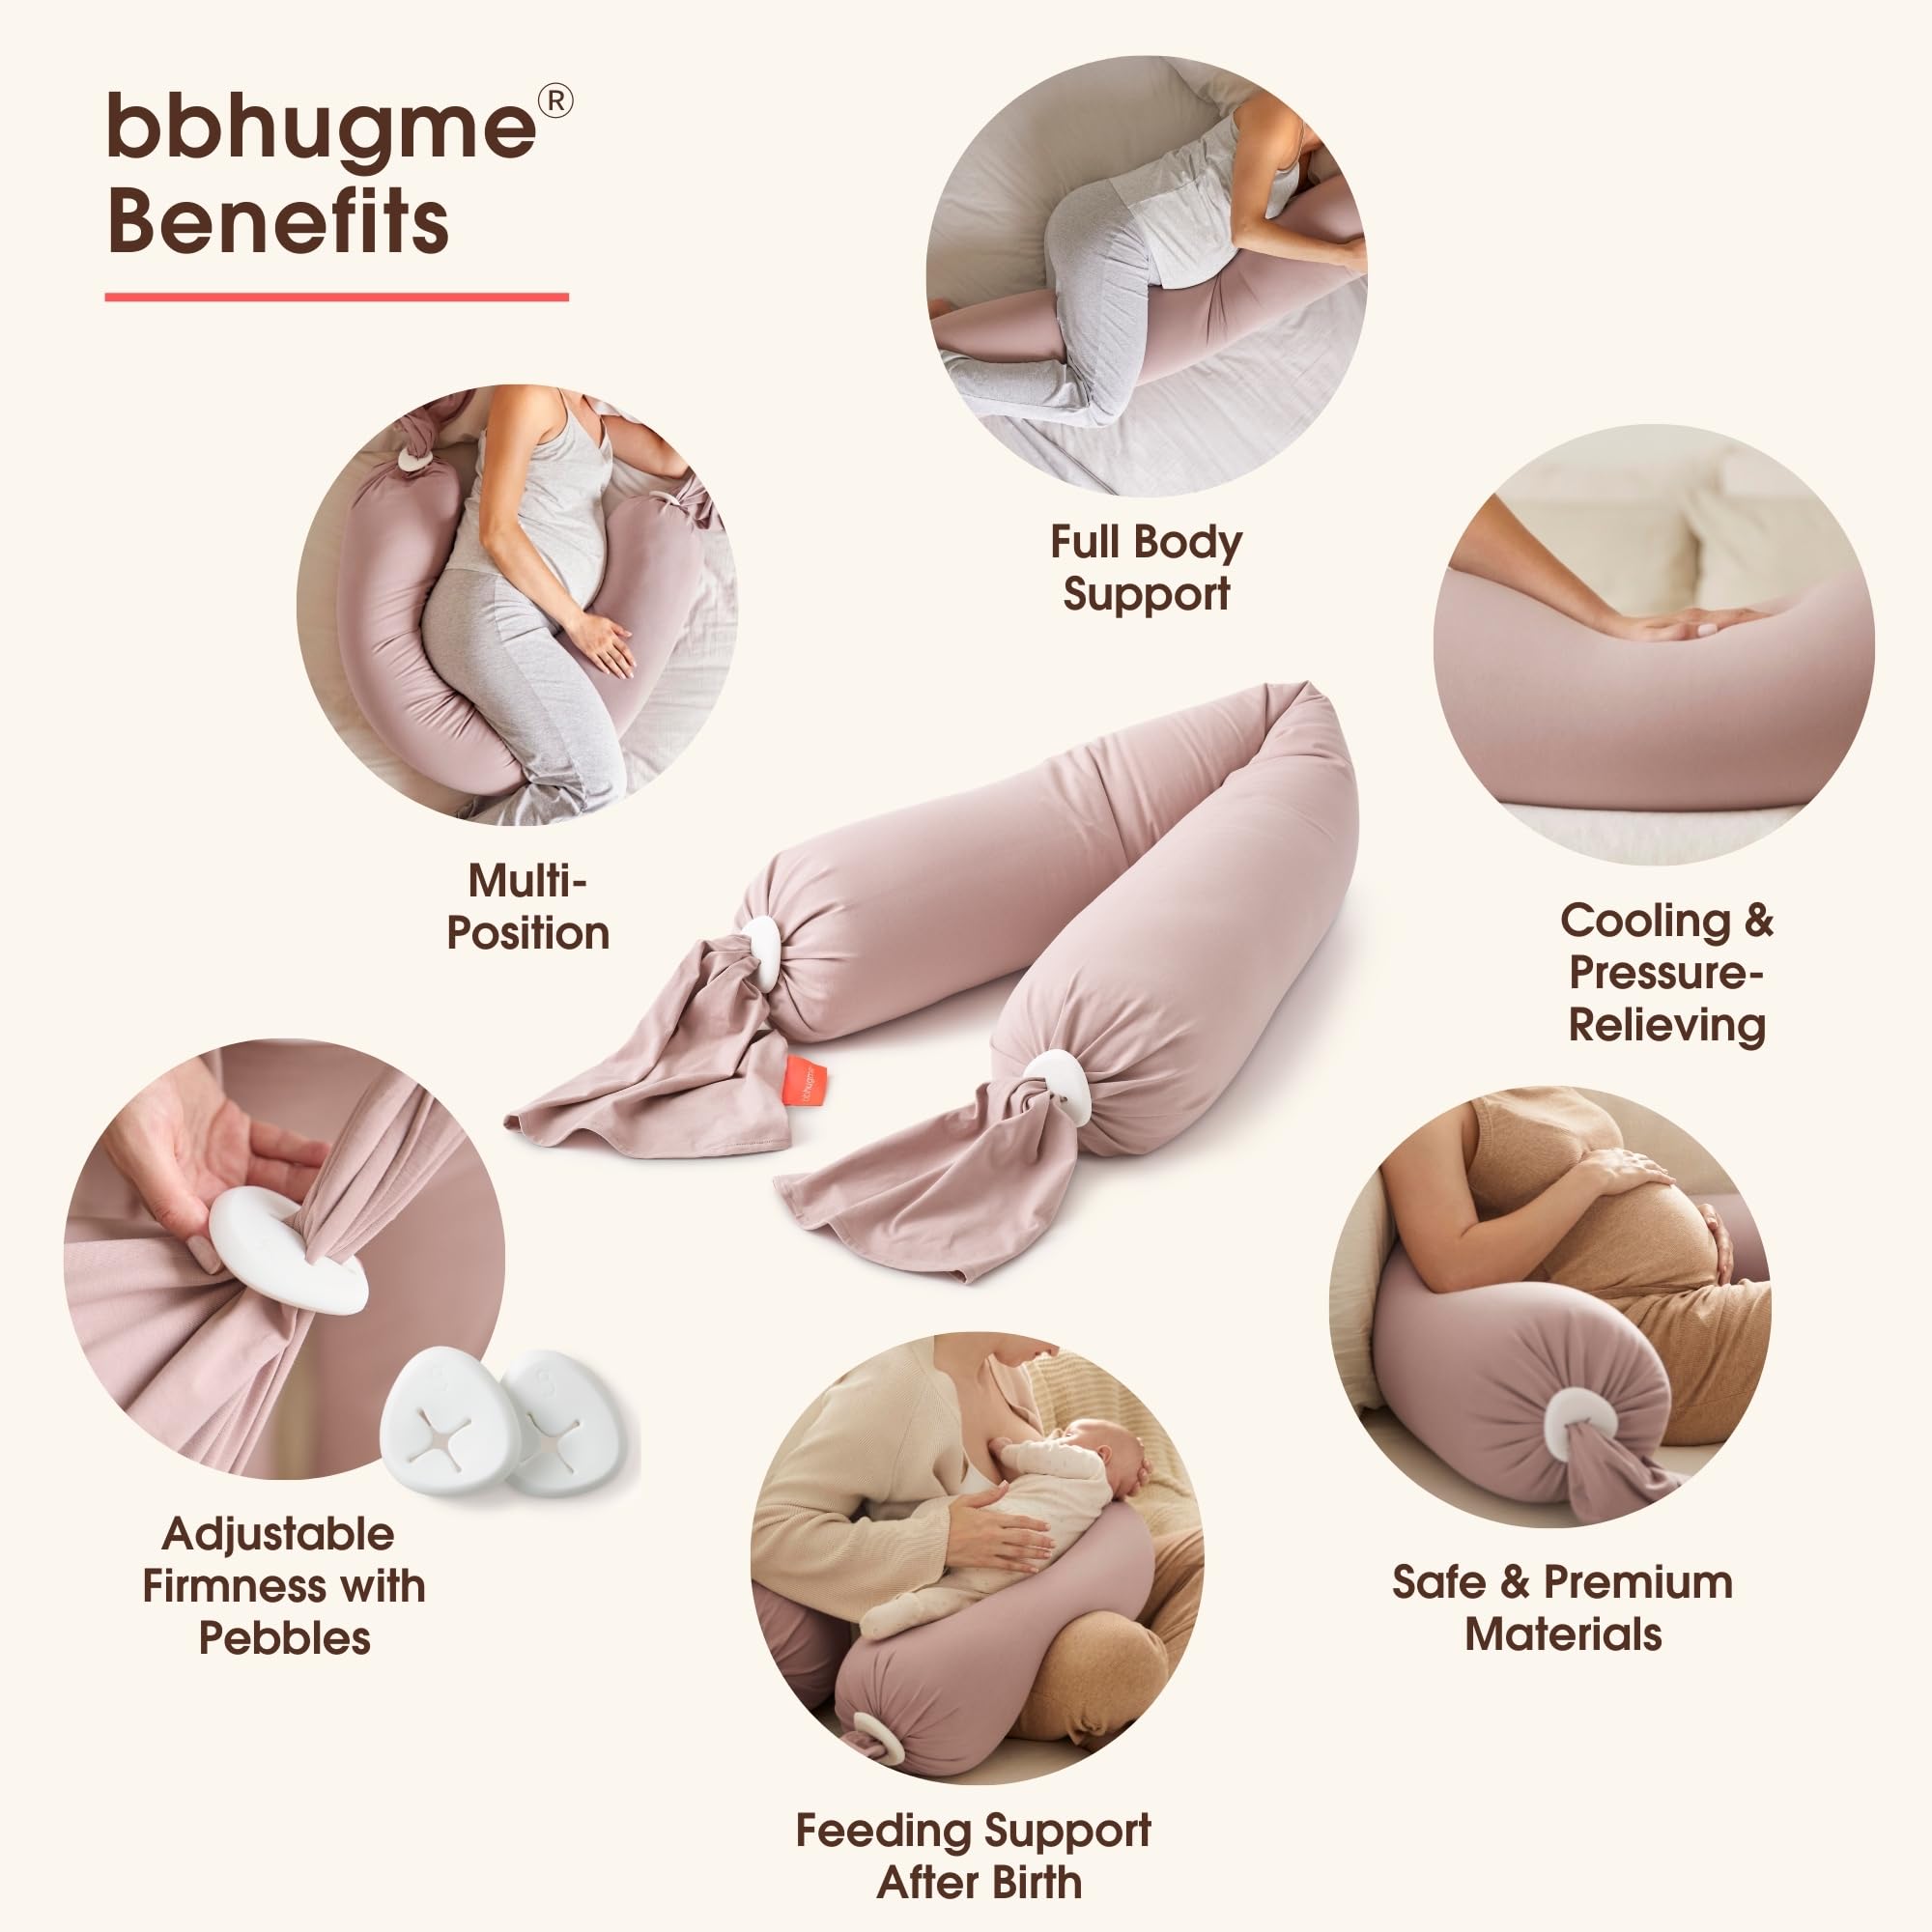 bbhugme Adjustable Pregnancy Pillow – Full Body Support for Side Sleeping - Adjustable Firmness and Shape - Supports Back, Legs, Belly, HIPS for Pregnant Women - Removable Cover - Dusty Pink